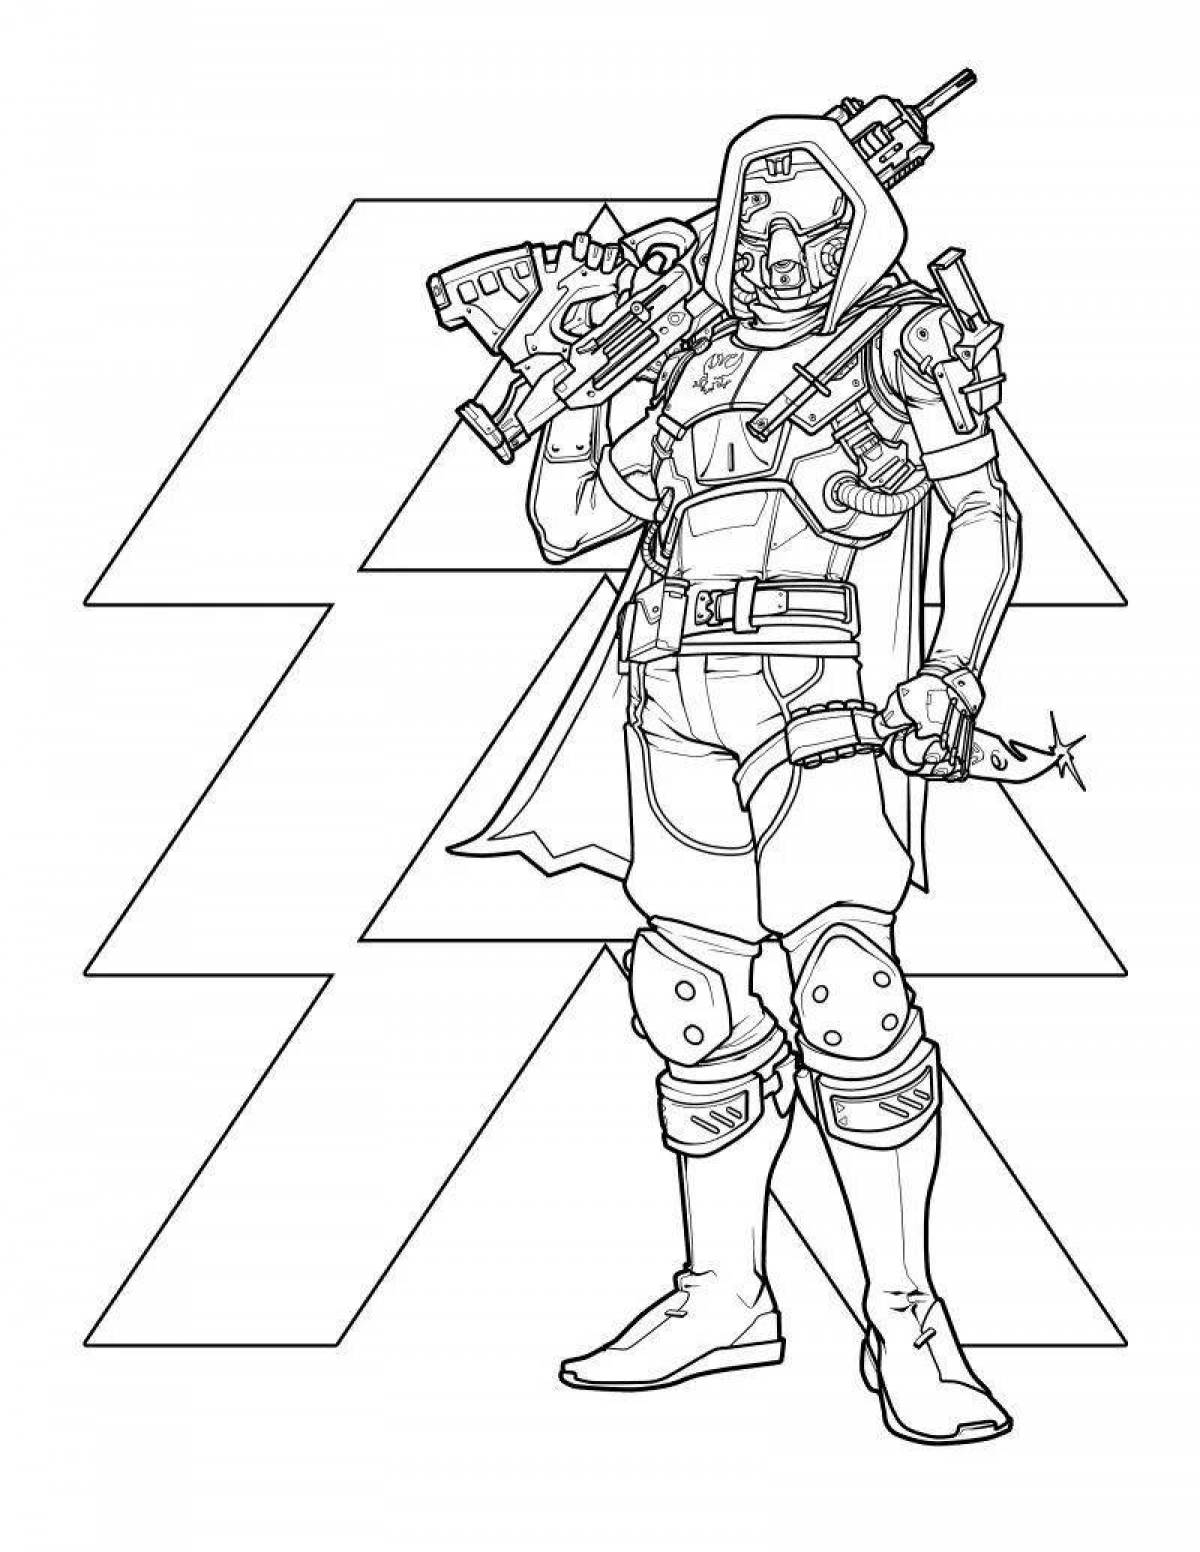 Invitation coloring pages